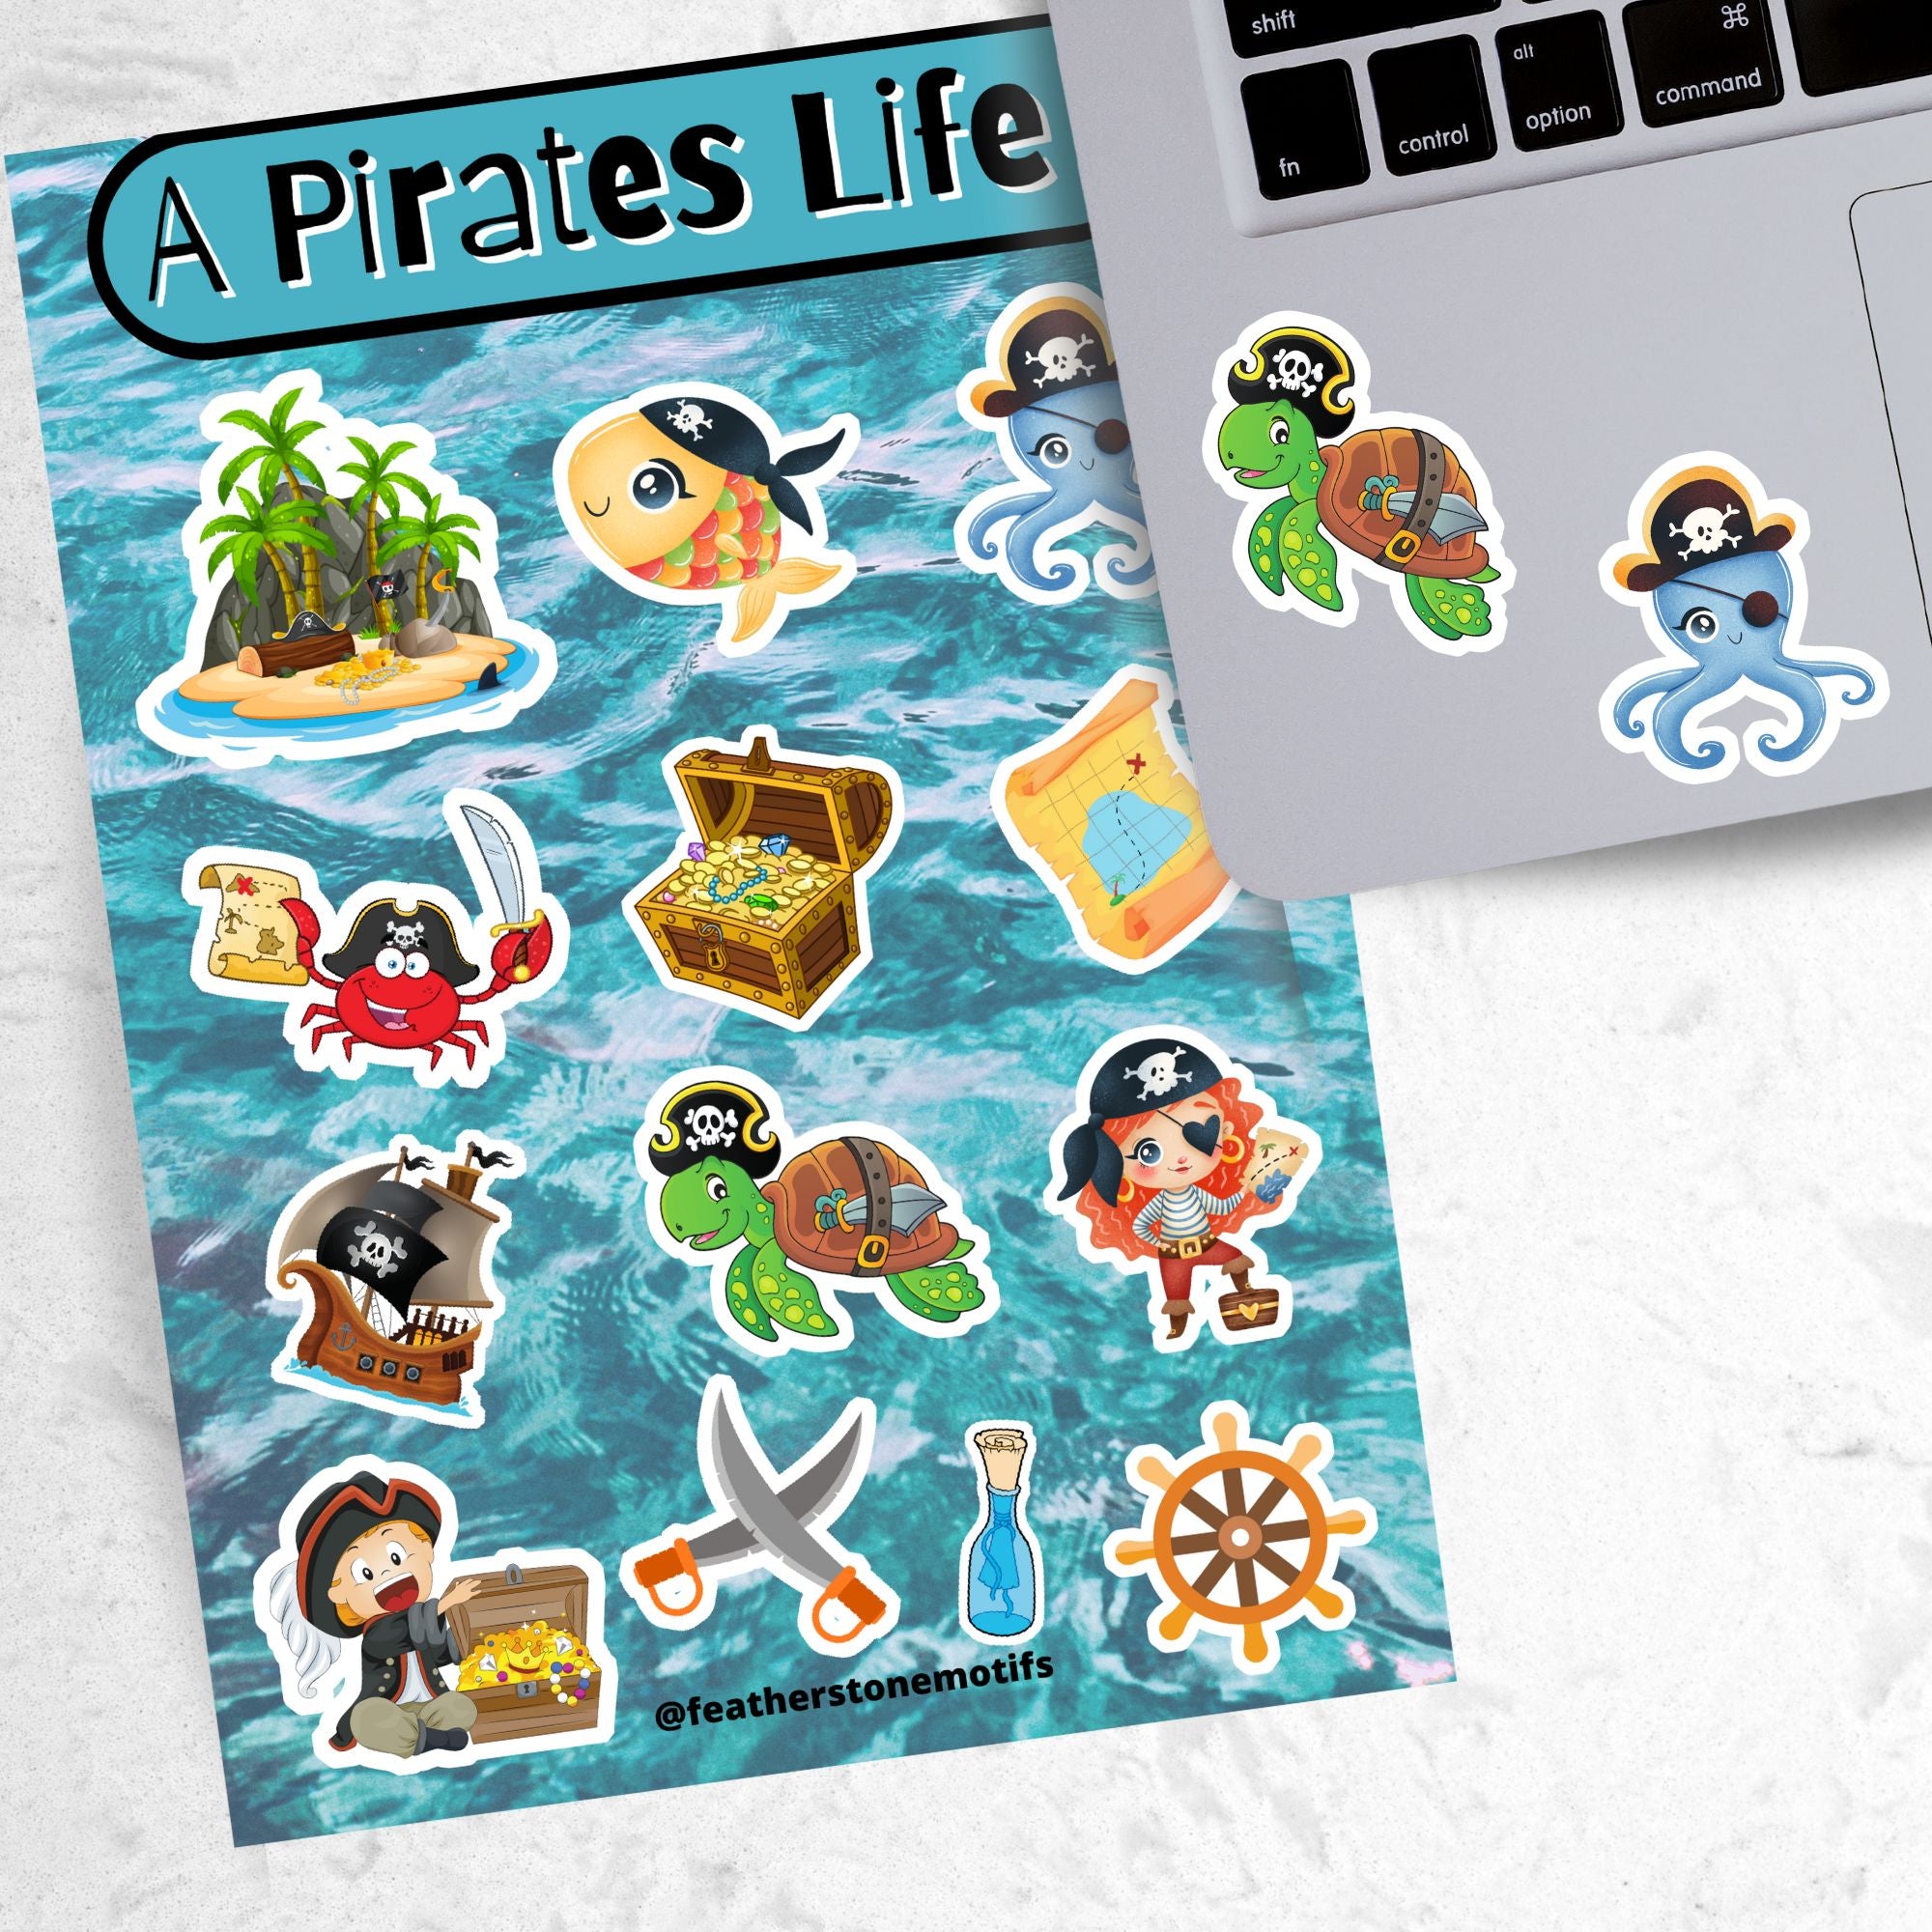 You'll walk the plank to get our A Pirates Life sticker sheet with individual stickers of treasure chests, treasure maps, pirate ships, pirates, and pirate creatures.  This is an image of a laptop with stickers on it.